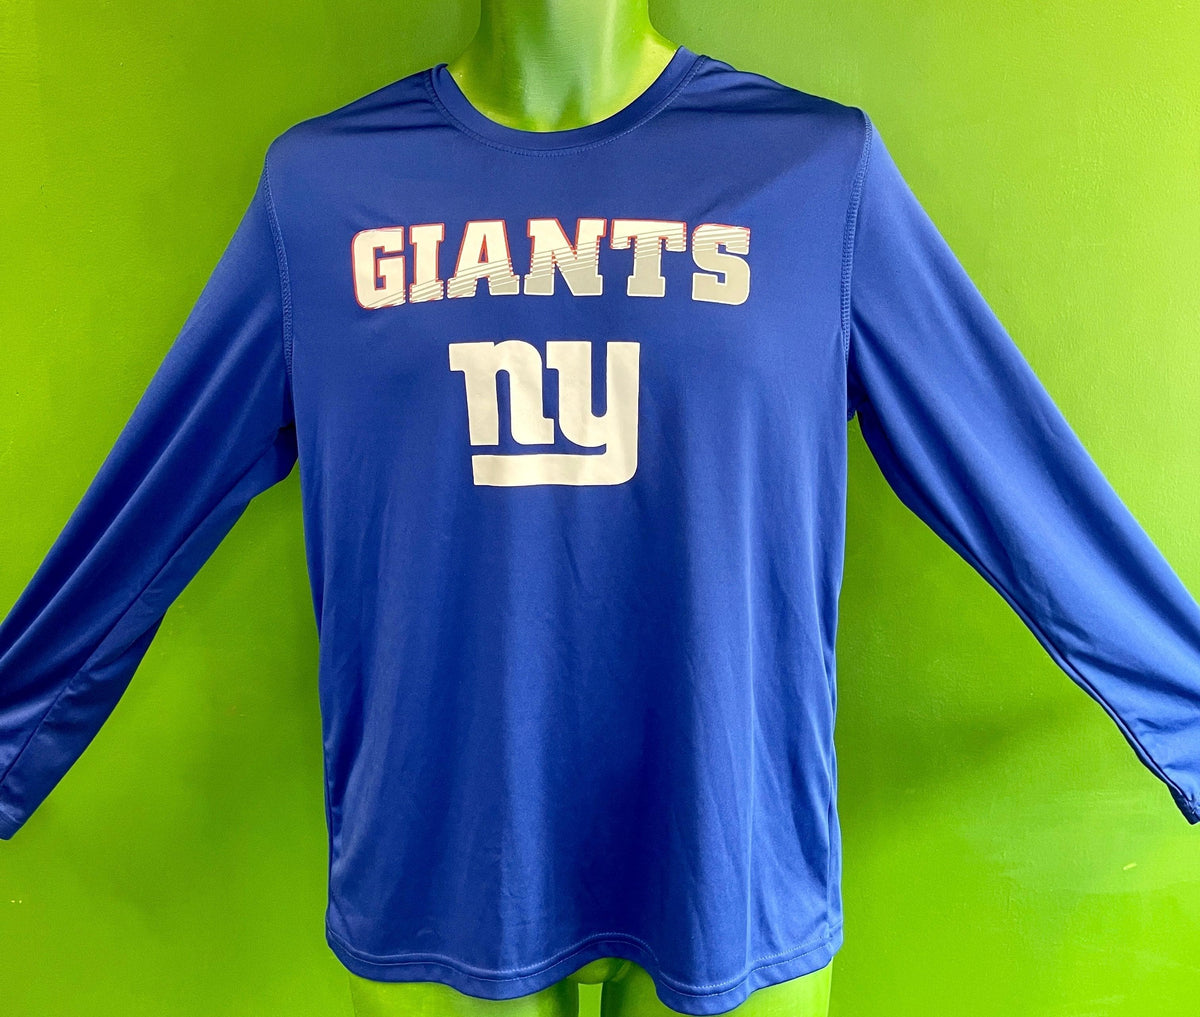 NFL New York Giants Blue L/S T-Shirt Youth X-Large 18